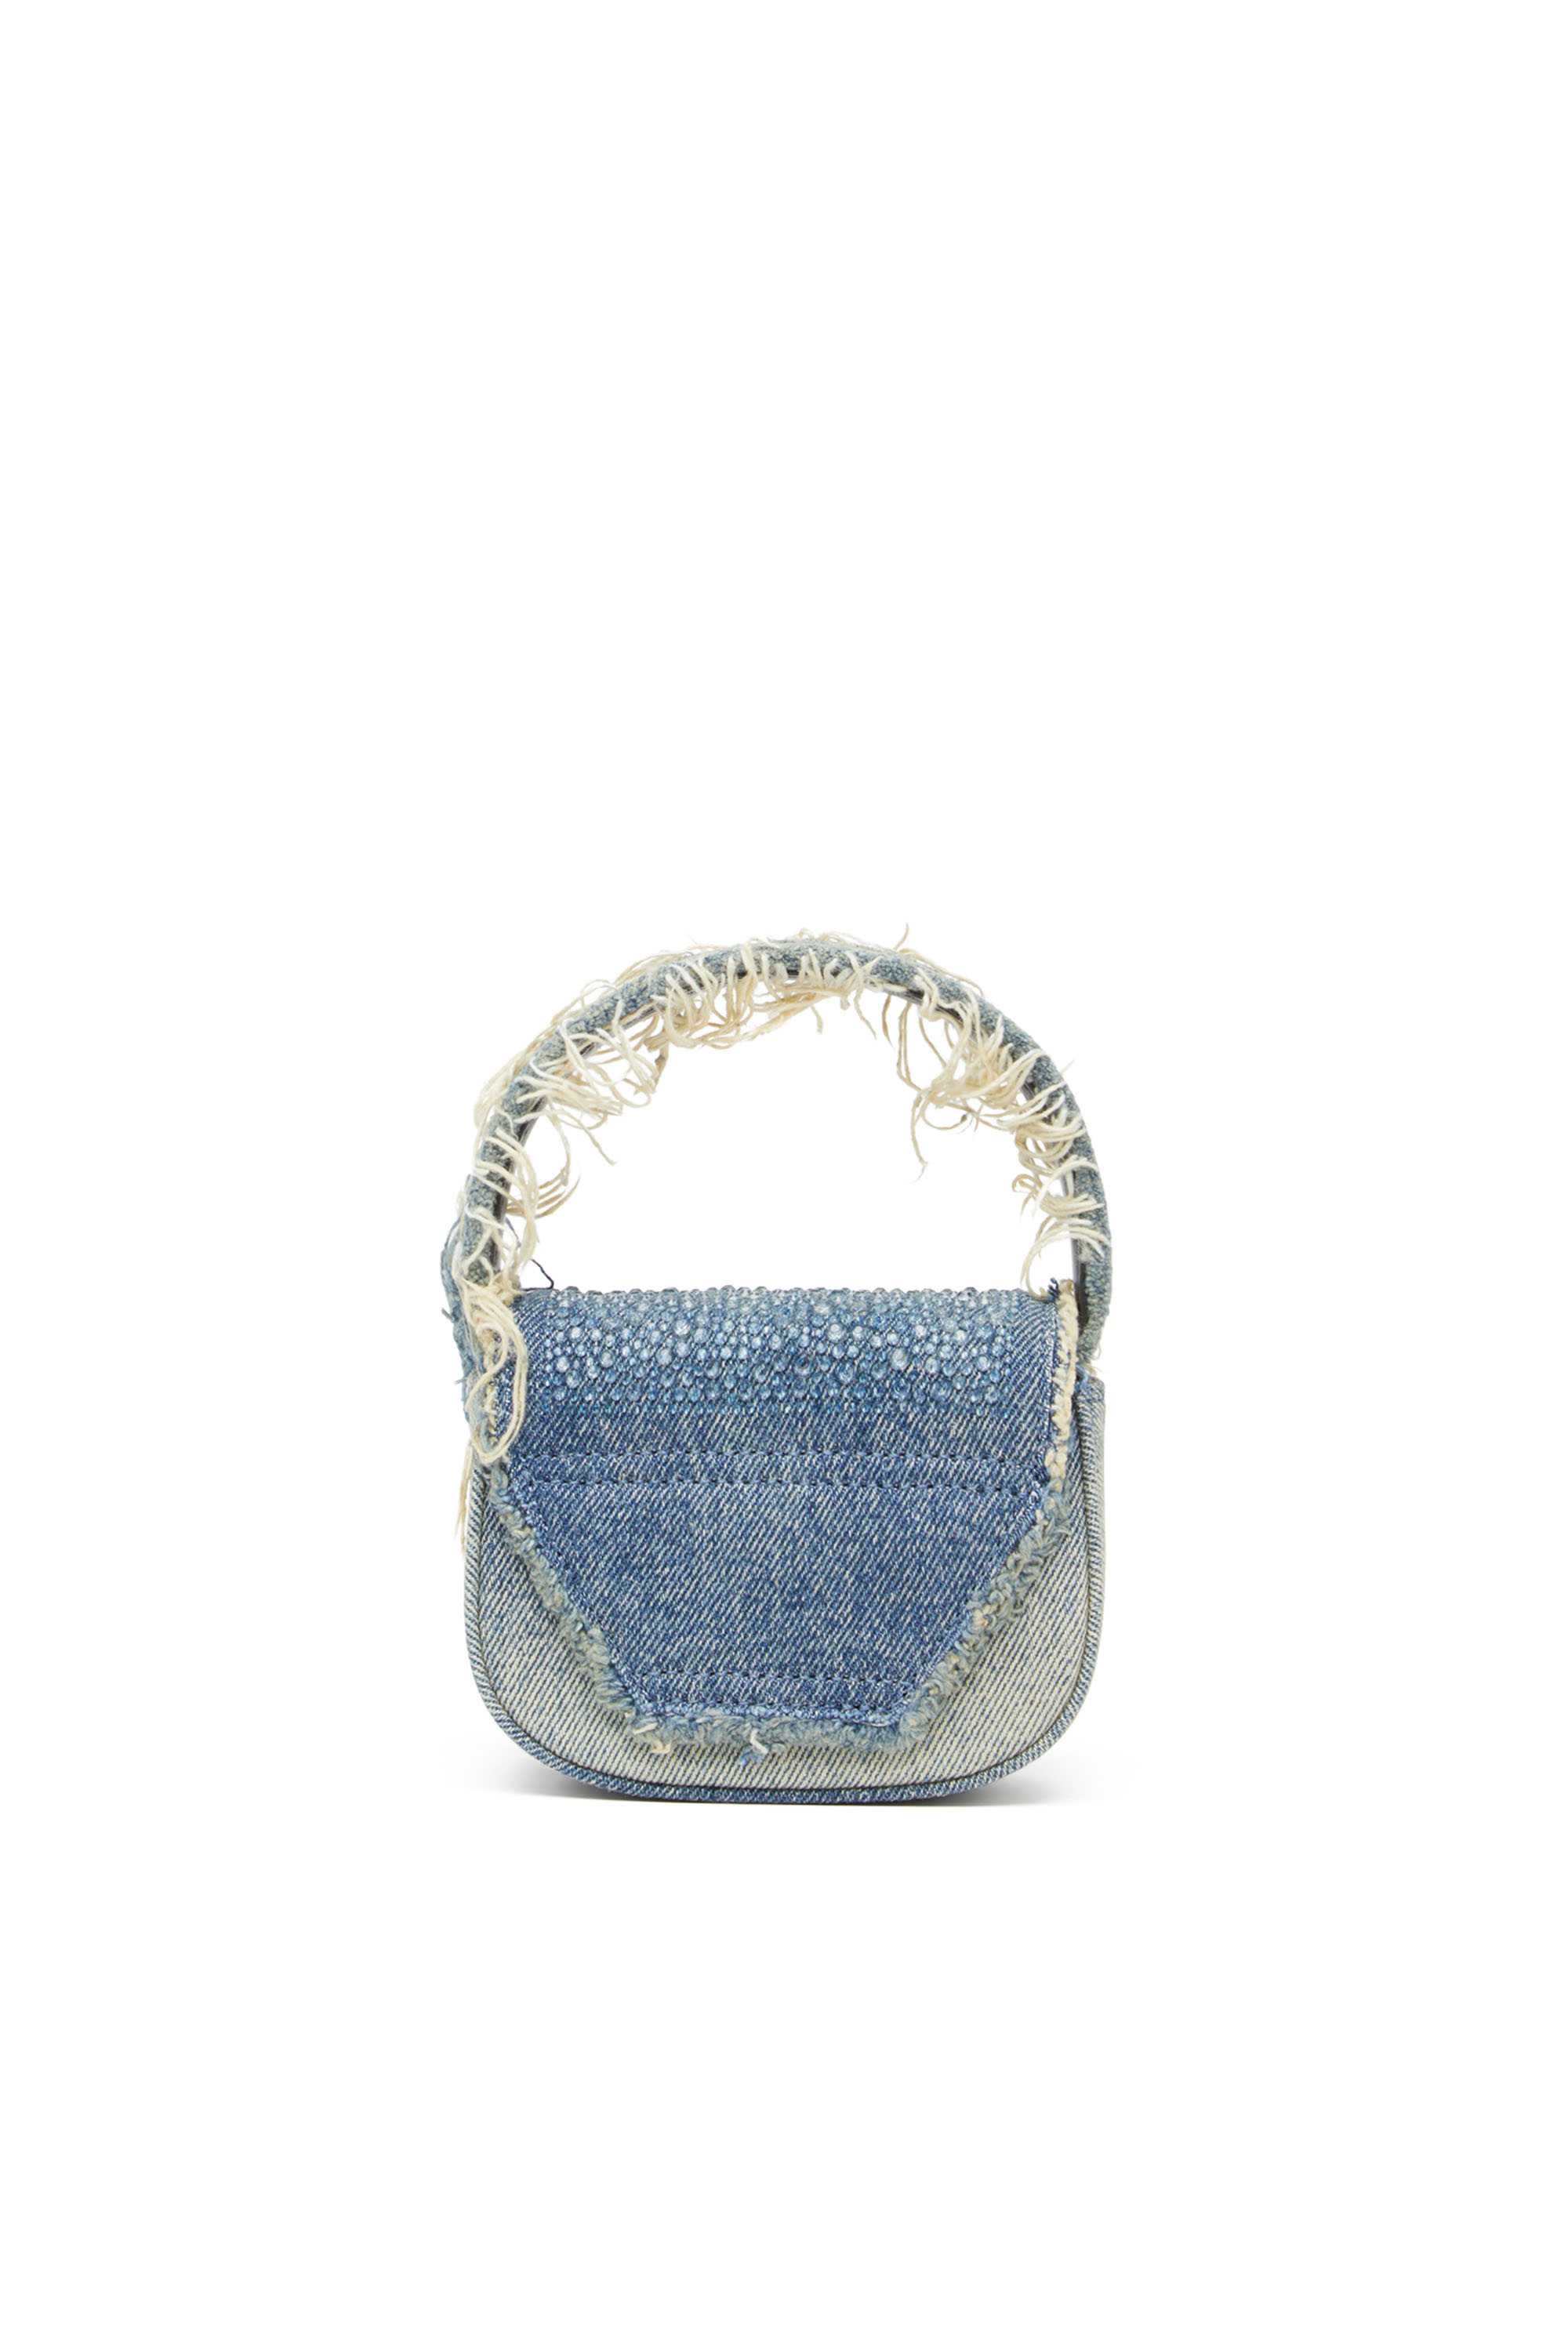 Diesel - 1DR XS, Female 1DR XS-Iconic mini bag in denim and crystals in ブルー - Image 2